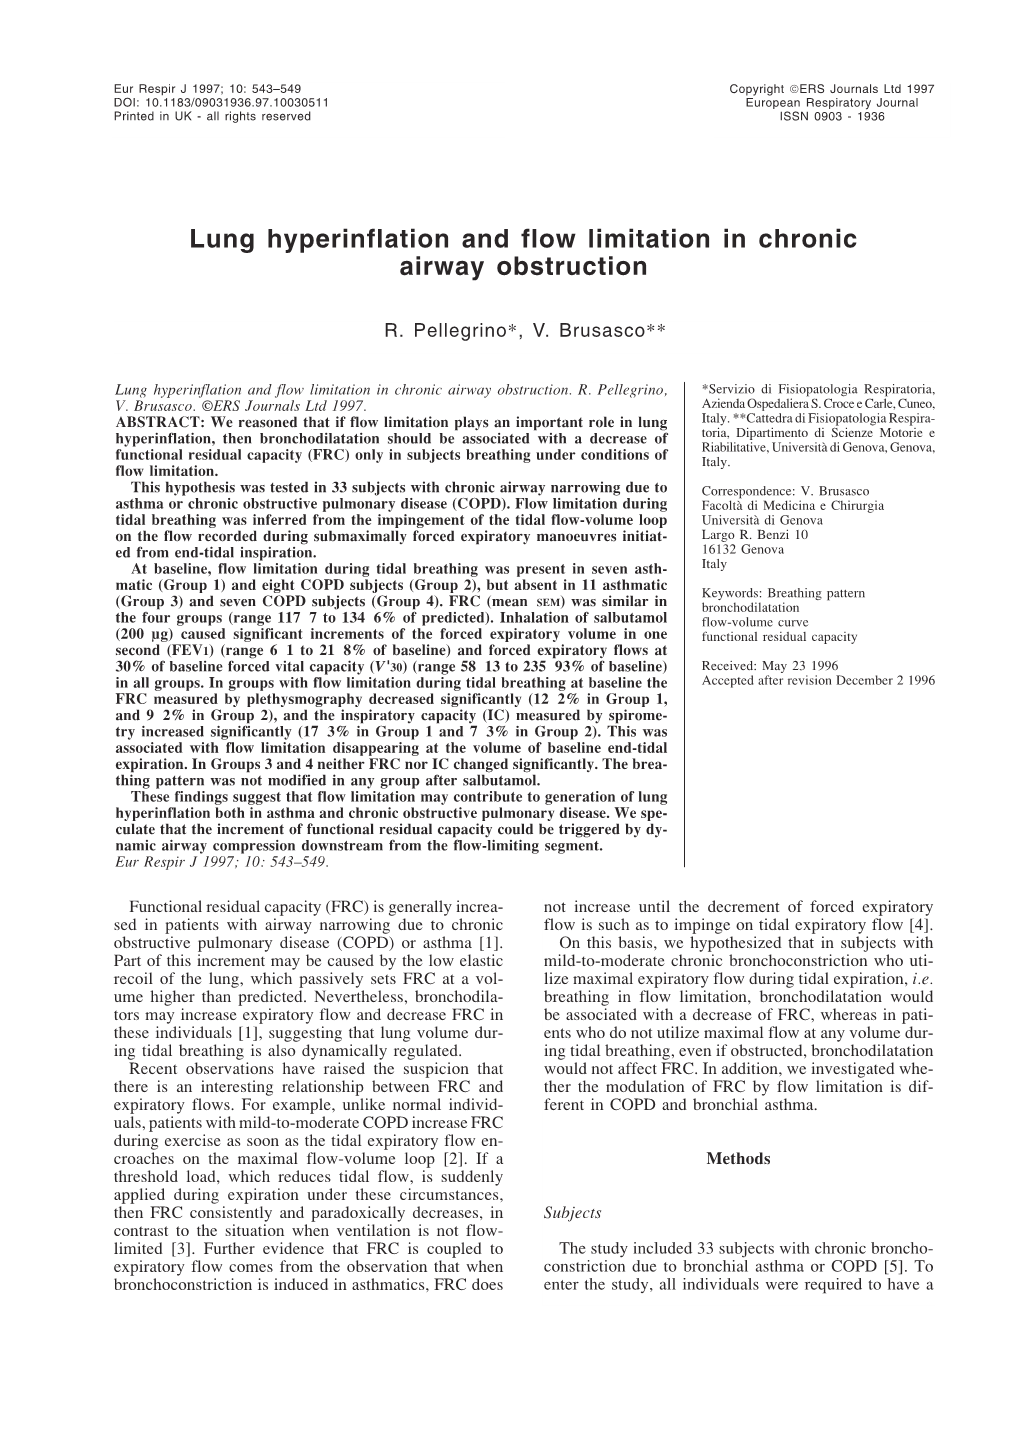 Lung Hyperinflation and Flow Limitation in Chronic Airway Obstruction